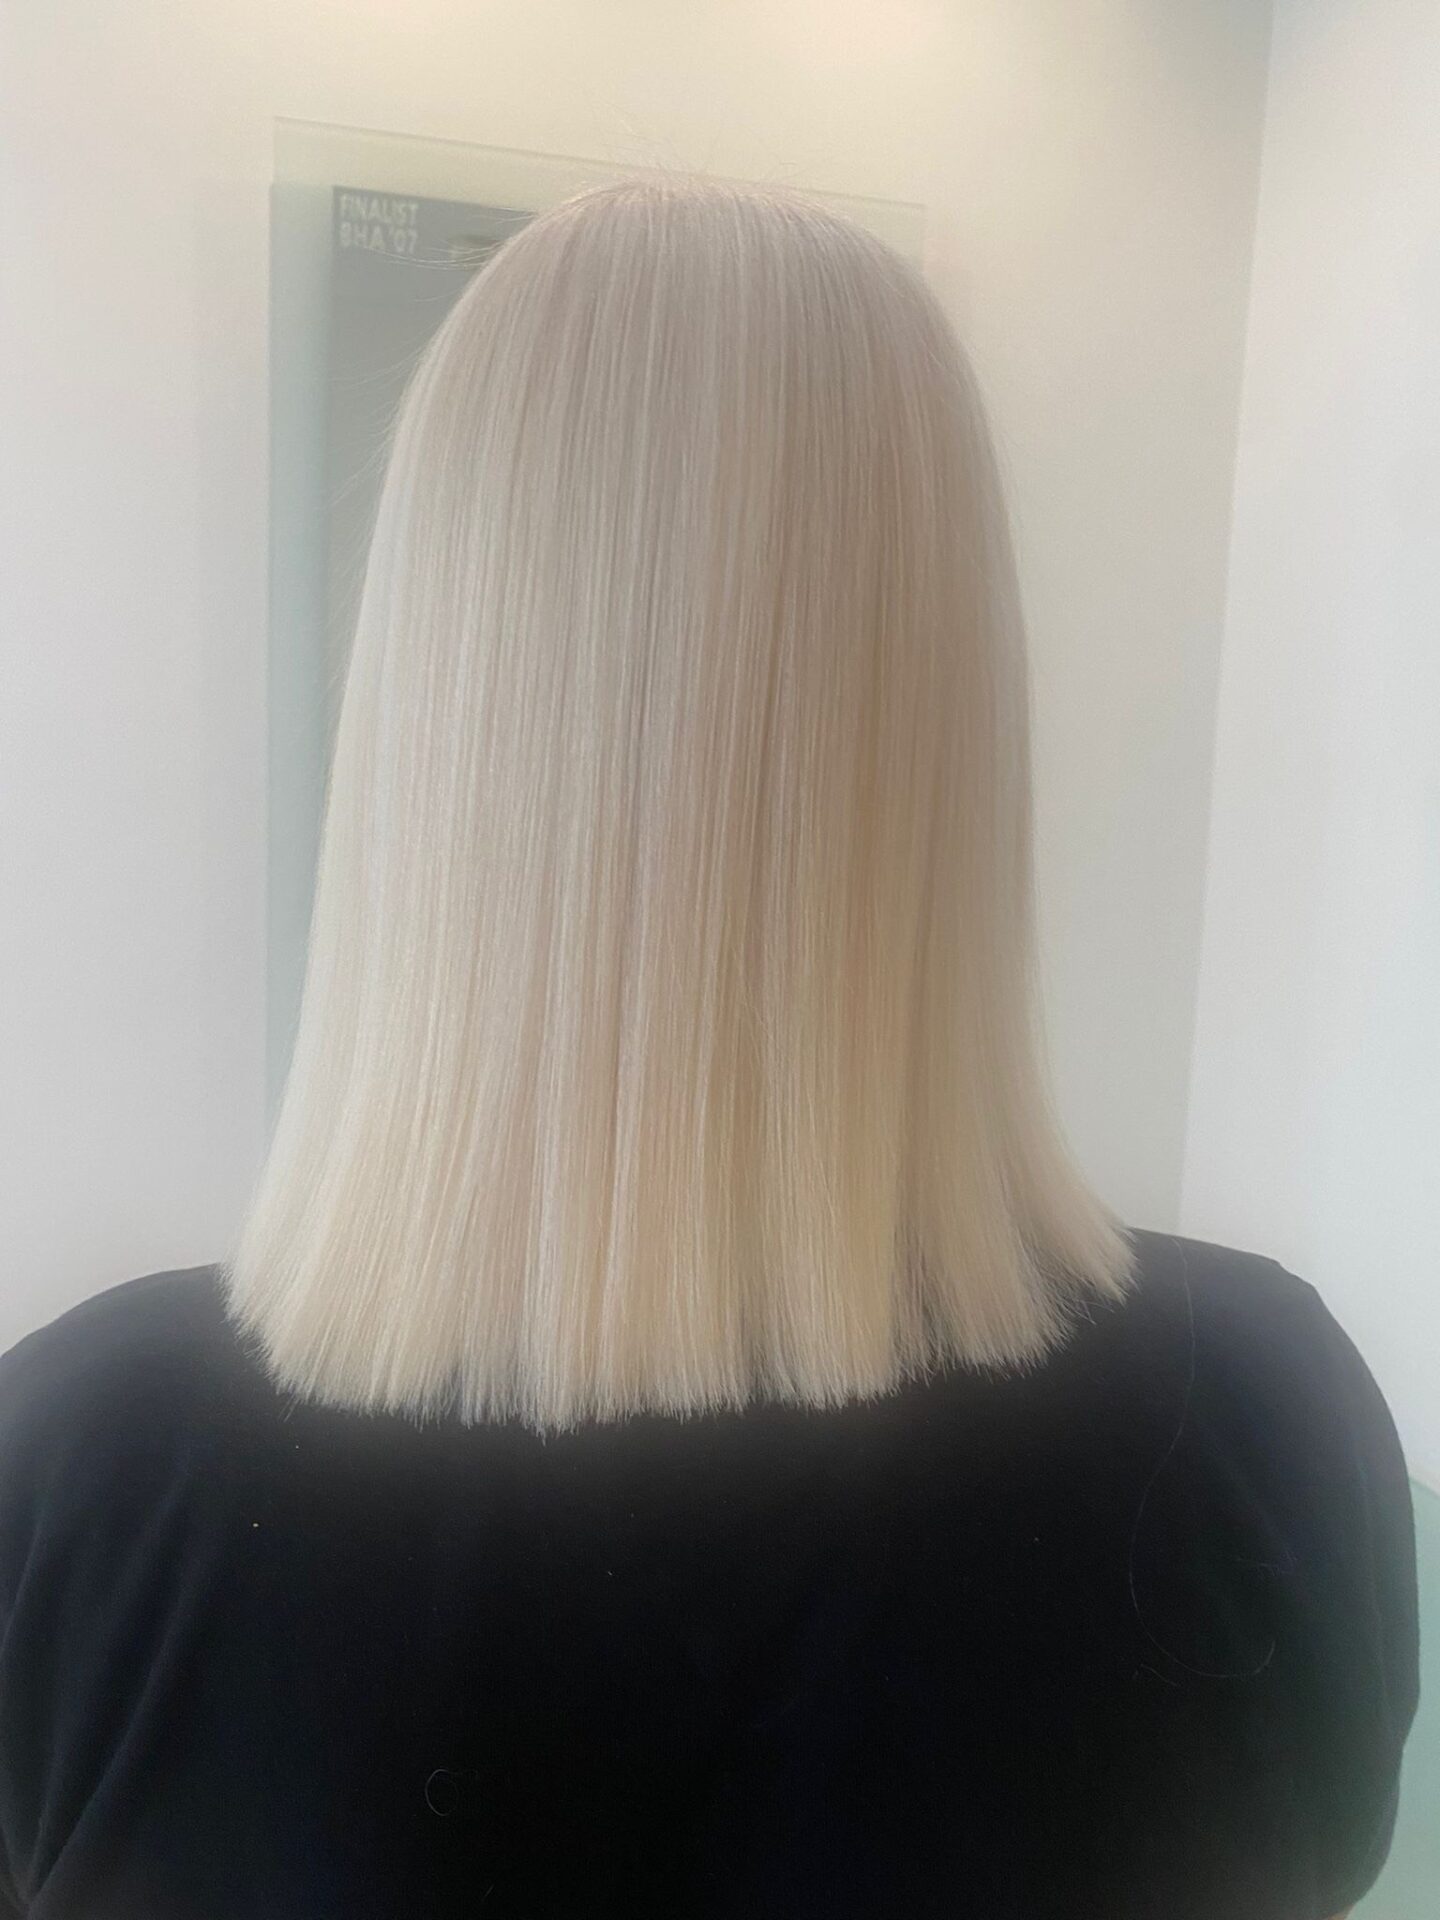 AFTER blonde hair keratin smoothing treatment essex